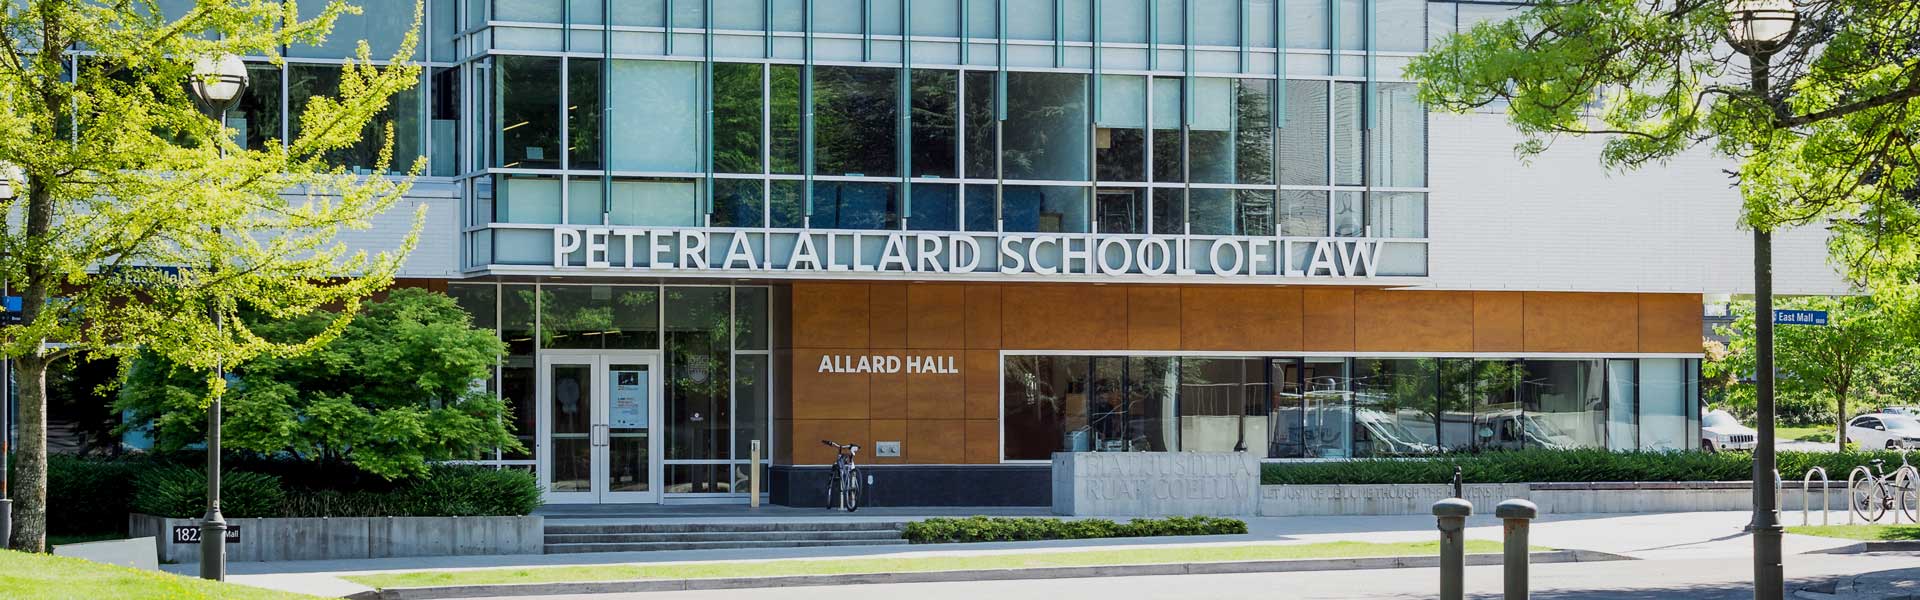 Front view of the UBC law school - Allard Hall building which is the main building of UBC law school